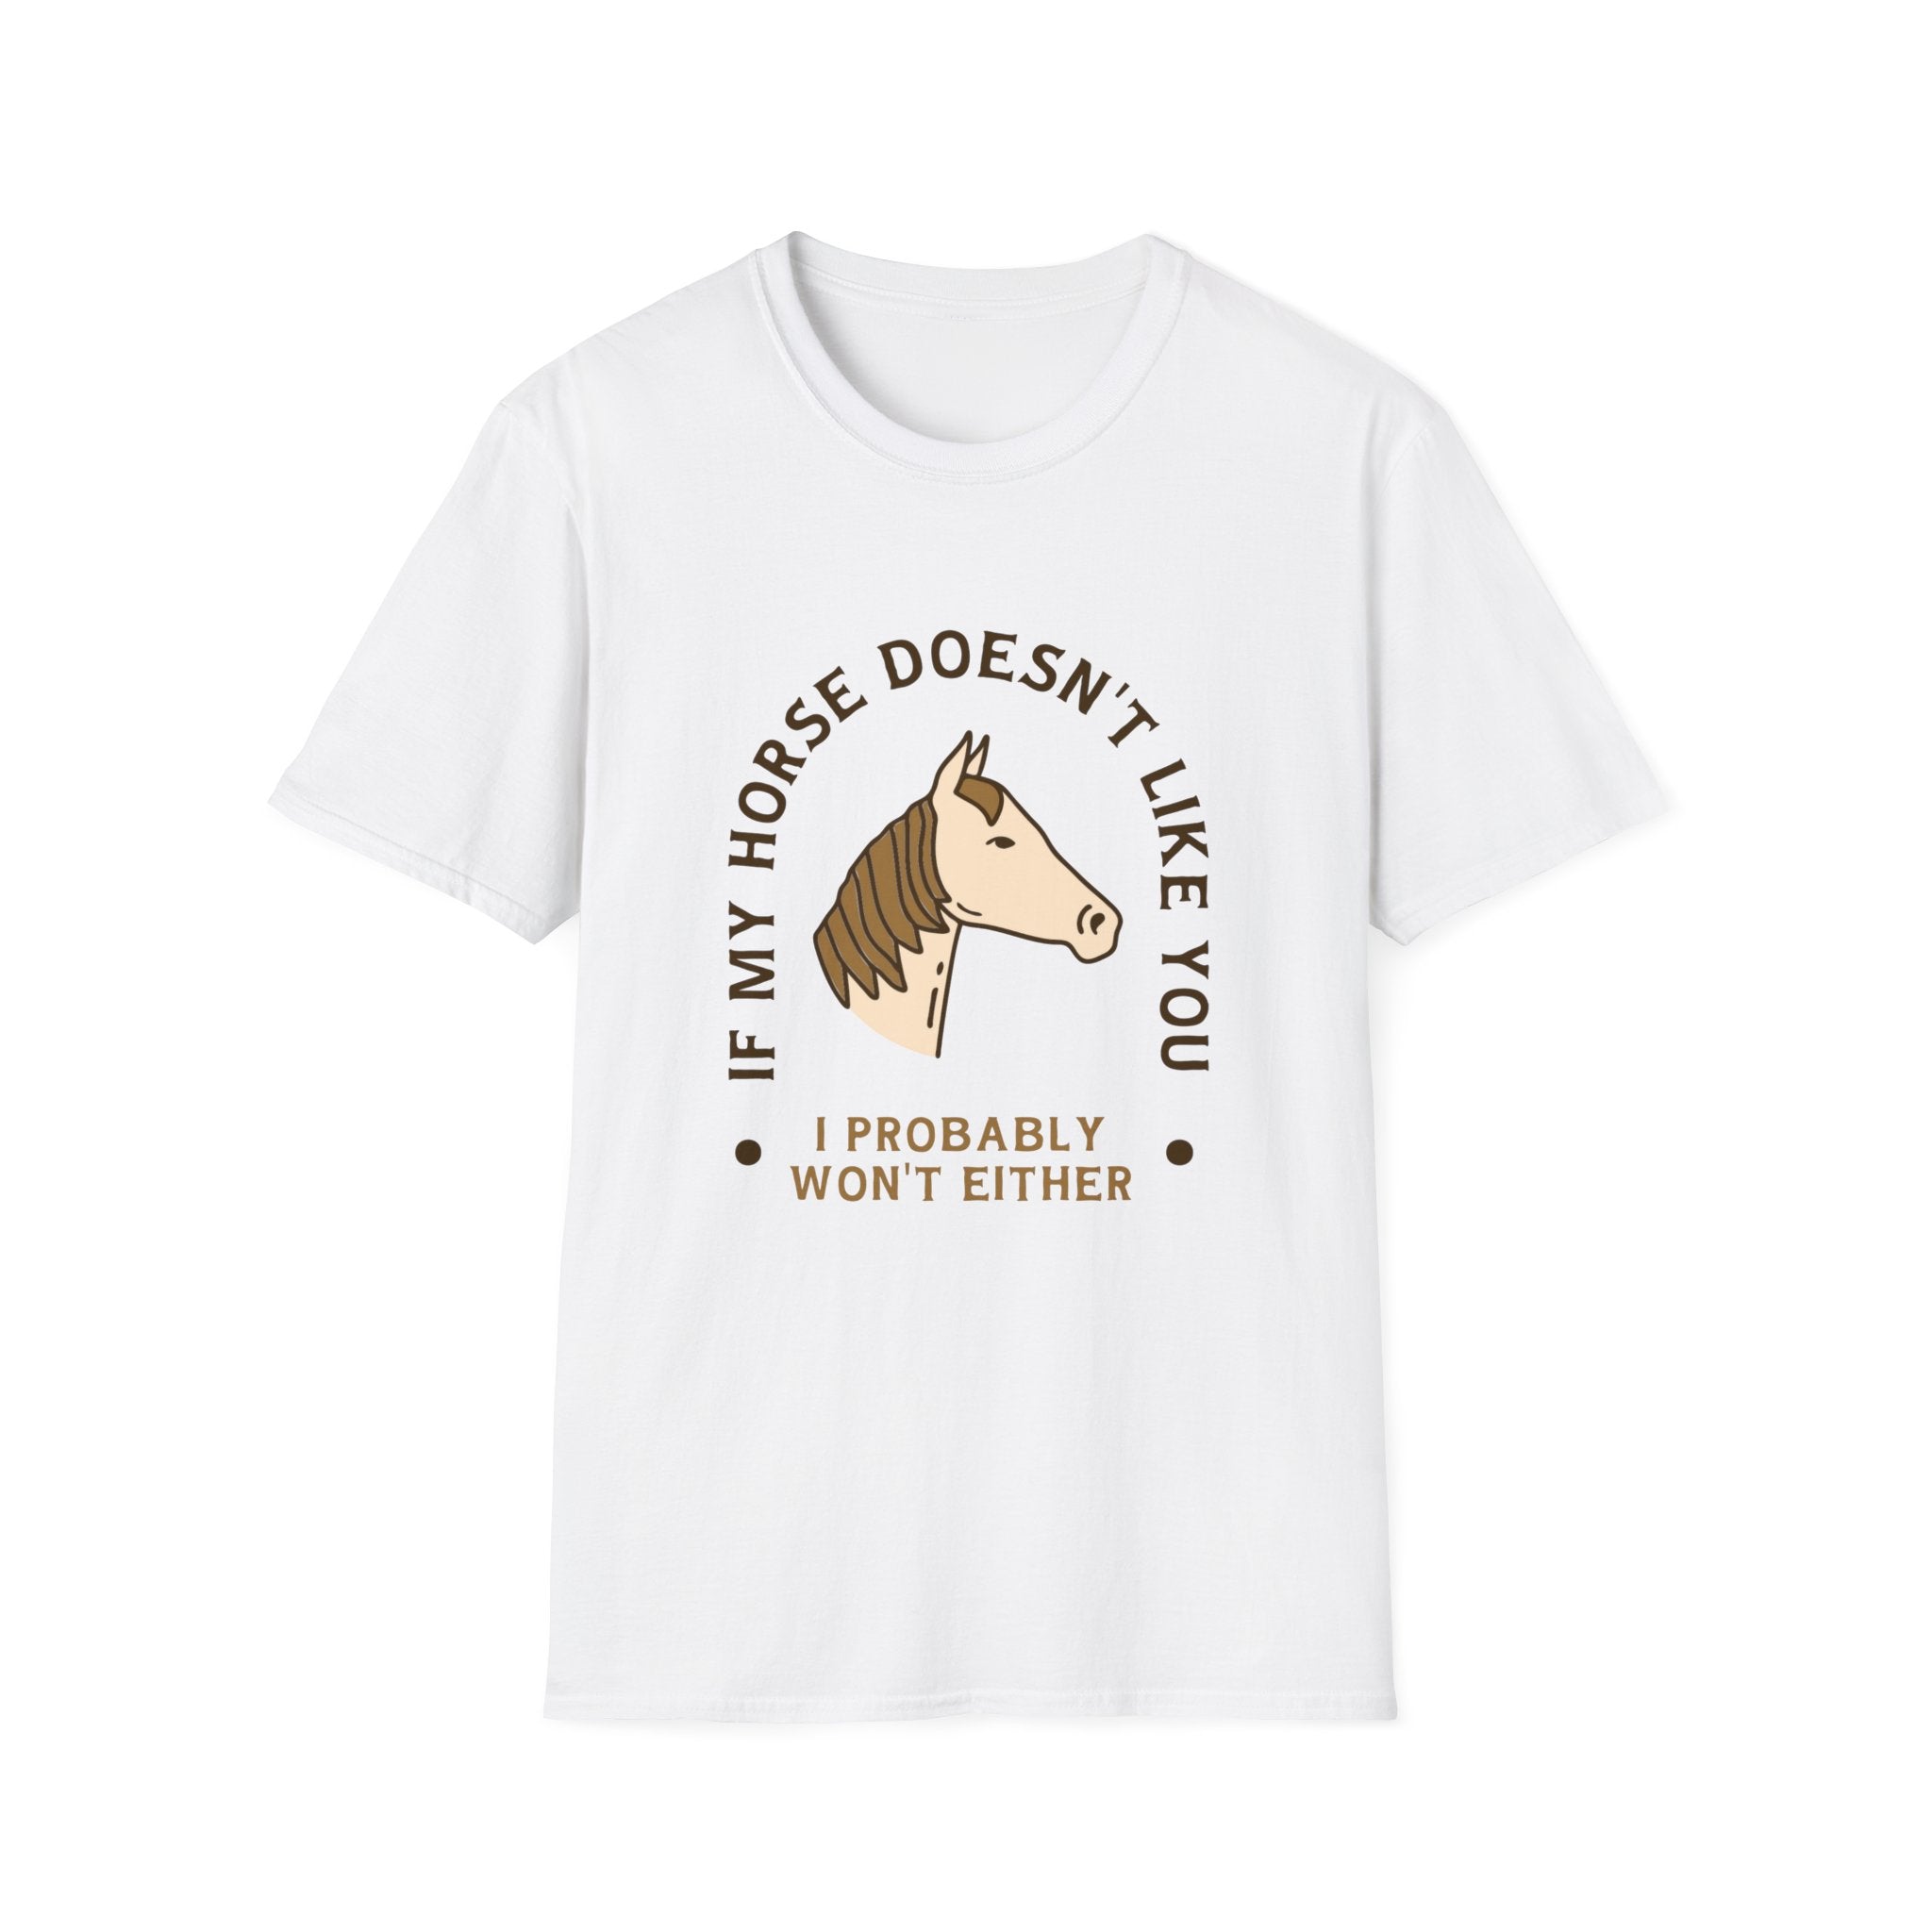 My Horse Doesn't Like You And I won't also T-Shirt